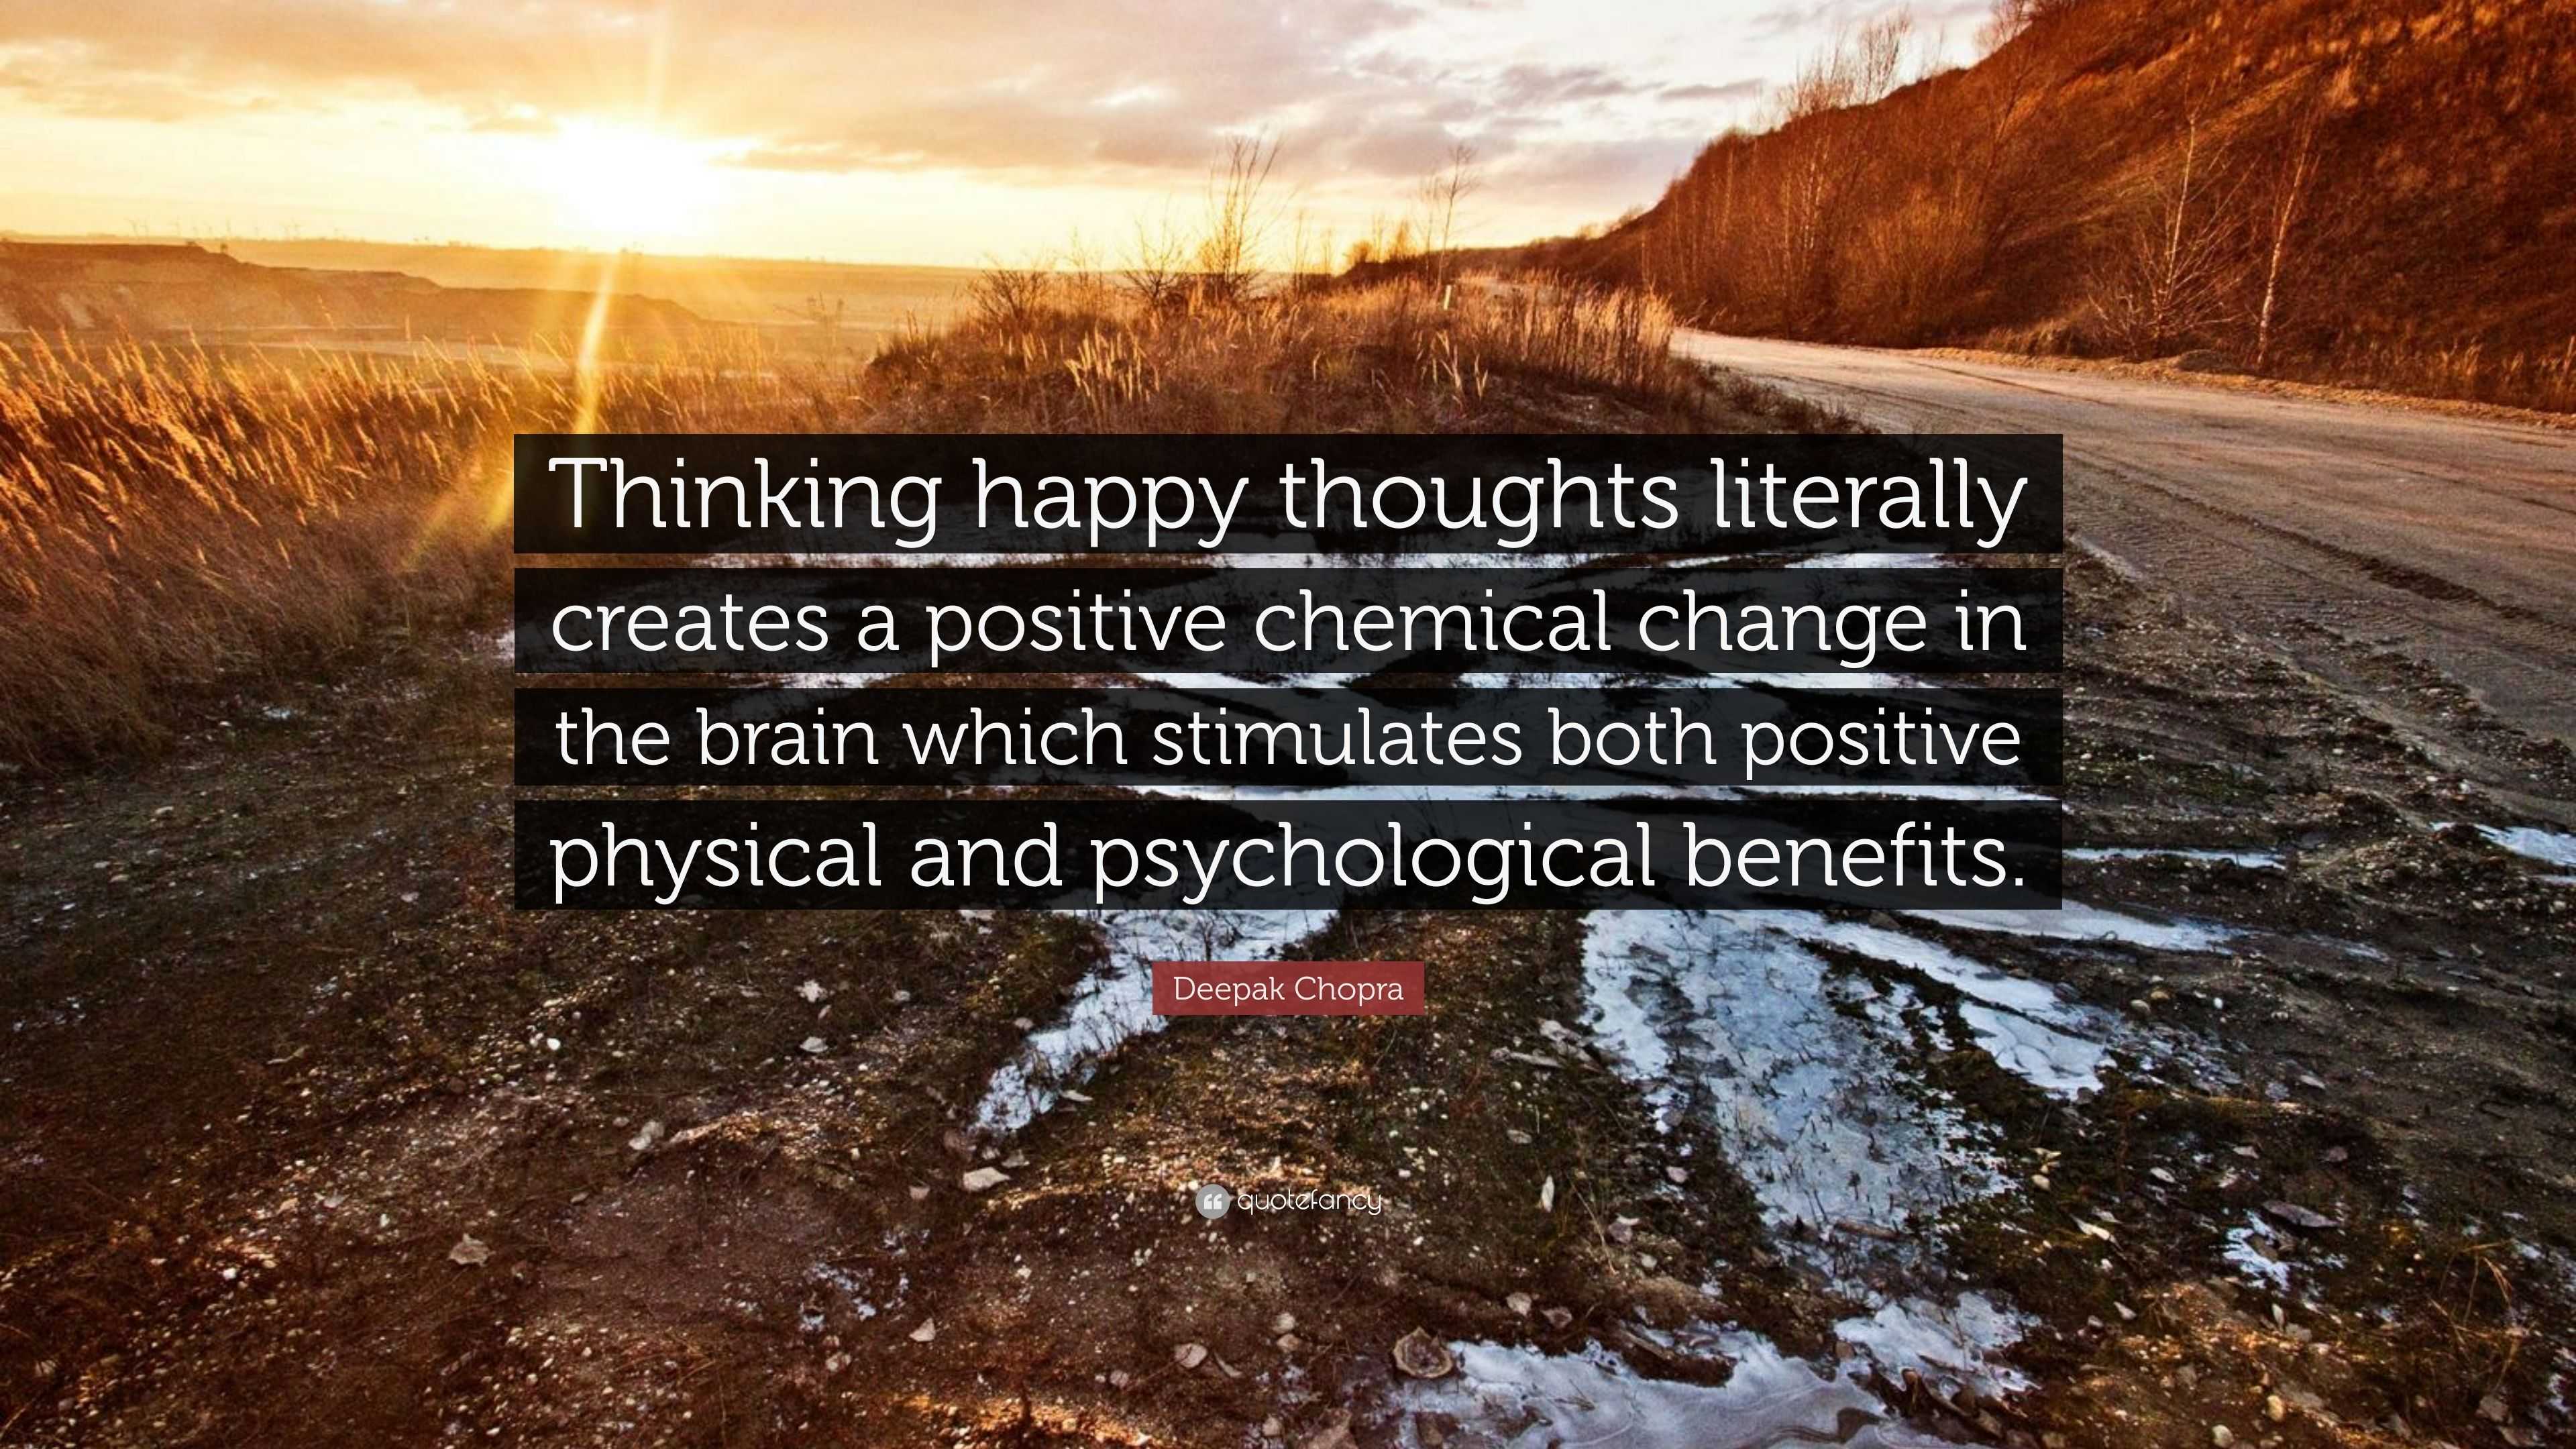 Deepak Chopra Quote: “Thinking happy thoughts literally creates a positive  chemical change in the brain which stimulates both positive physica”